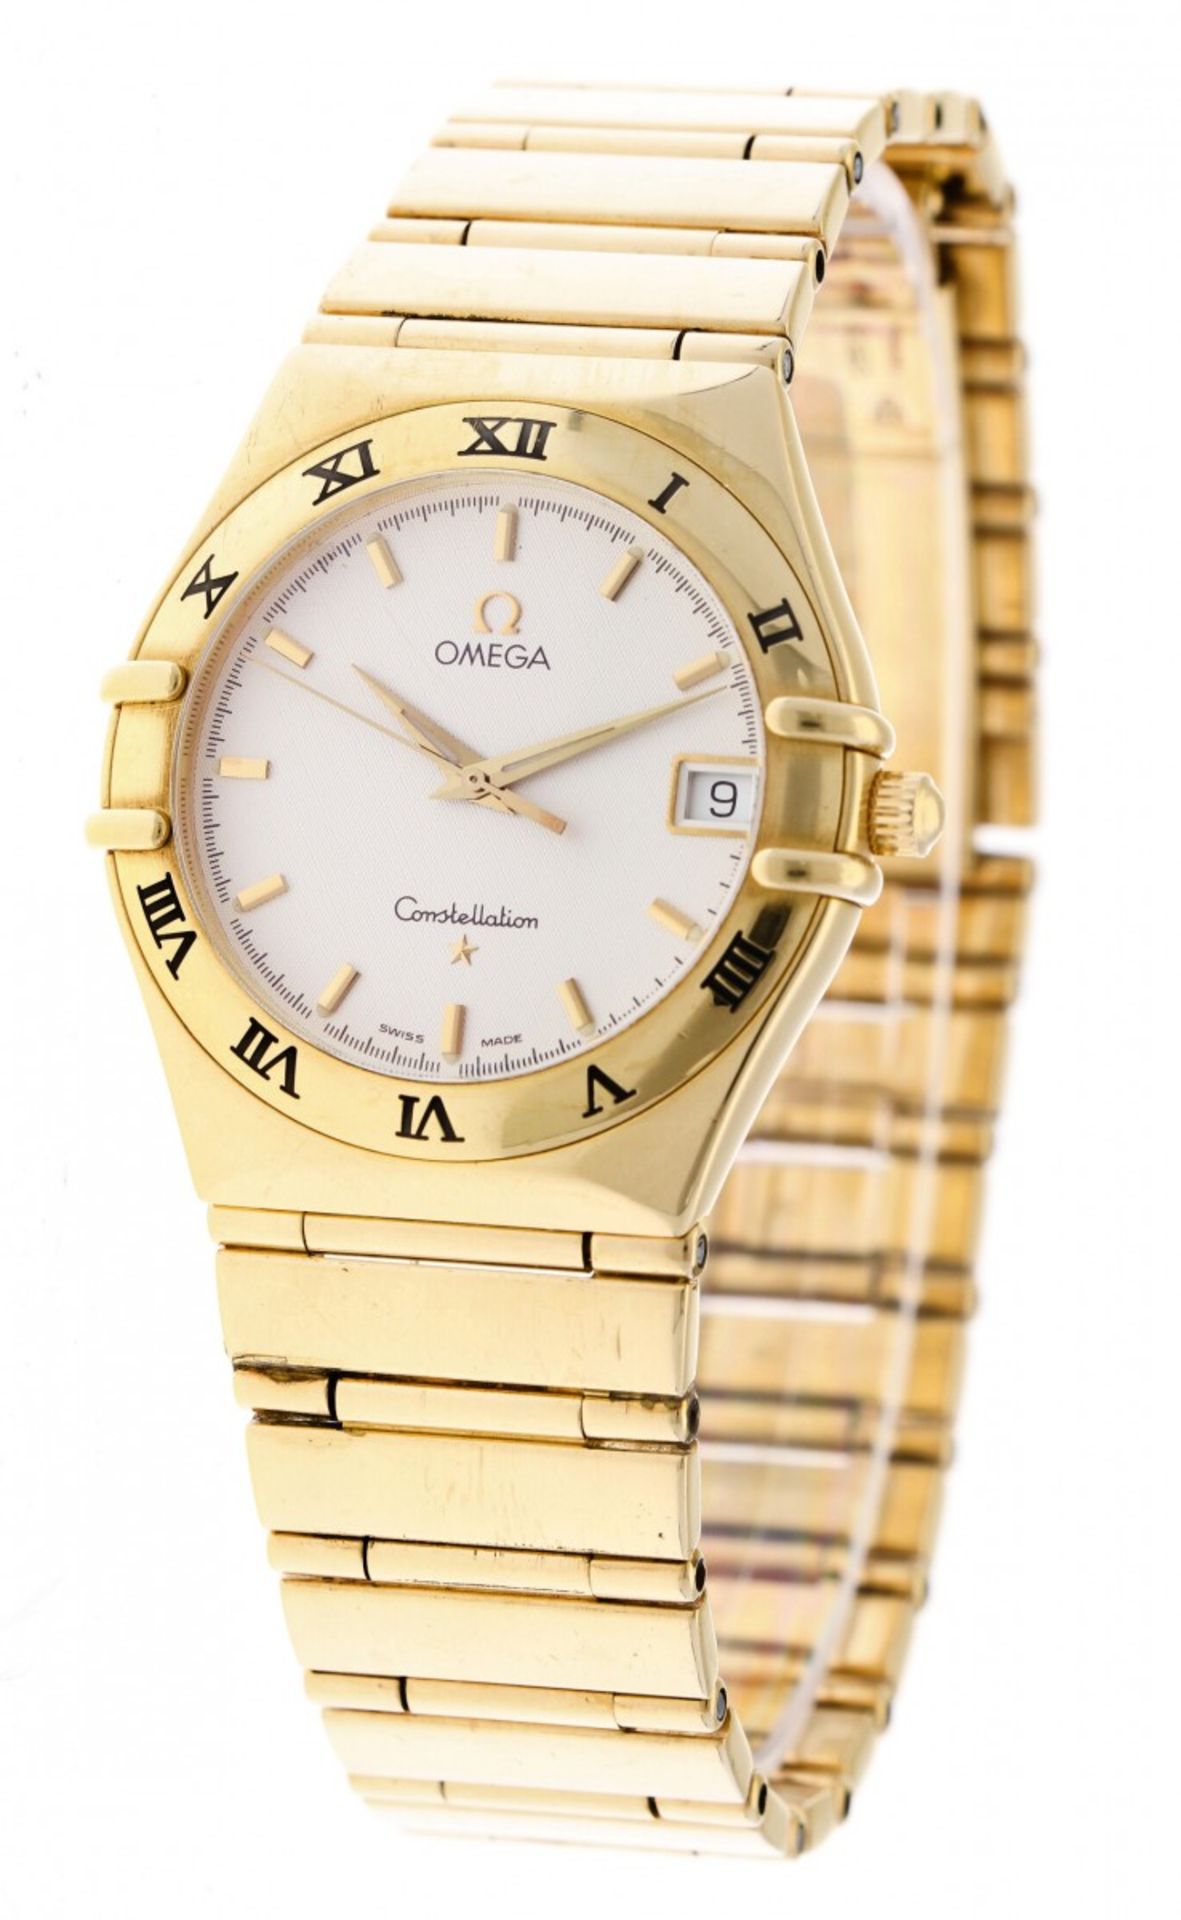 Omega Constellation 3961201 -Men's watch - ca. 1998 - Image 2 of 5